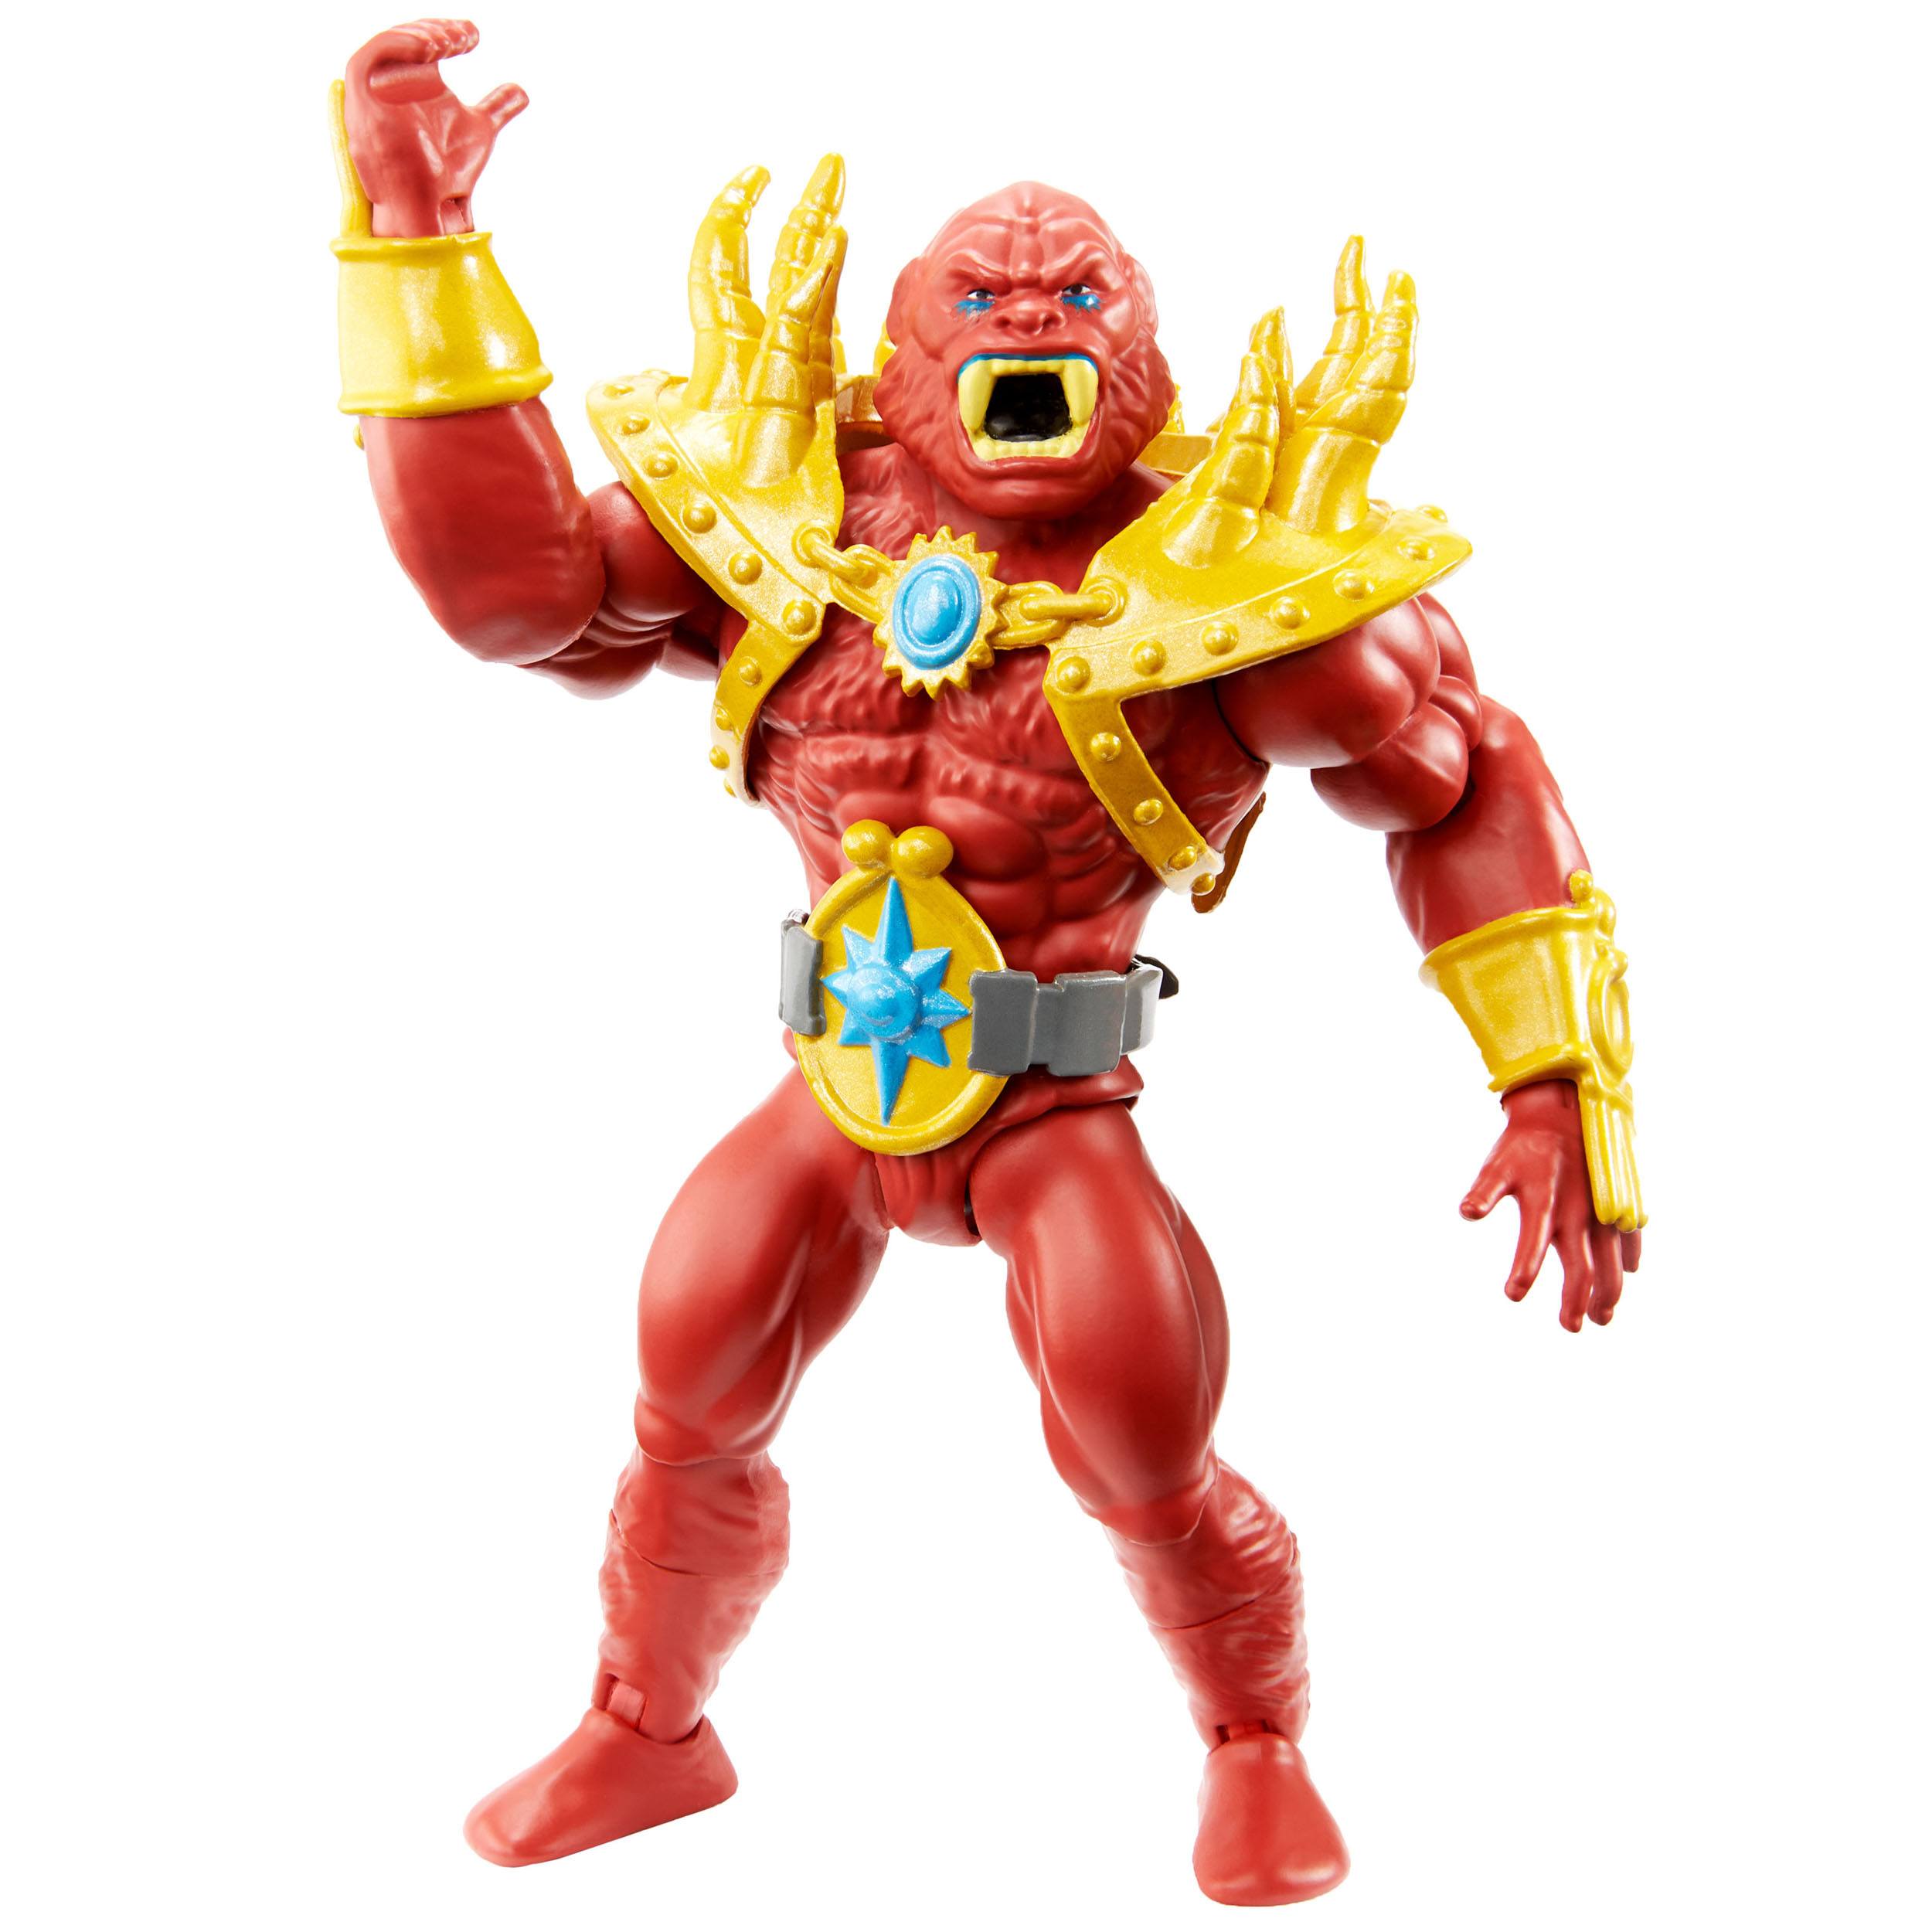 Masters of the Universe Origins Actionfigur 2021 Lords of Power Beast Man 14 cm MATTGYY26 0887961982794